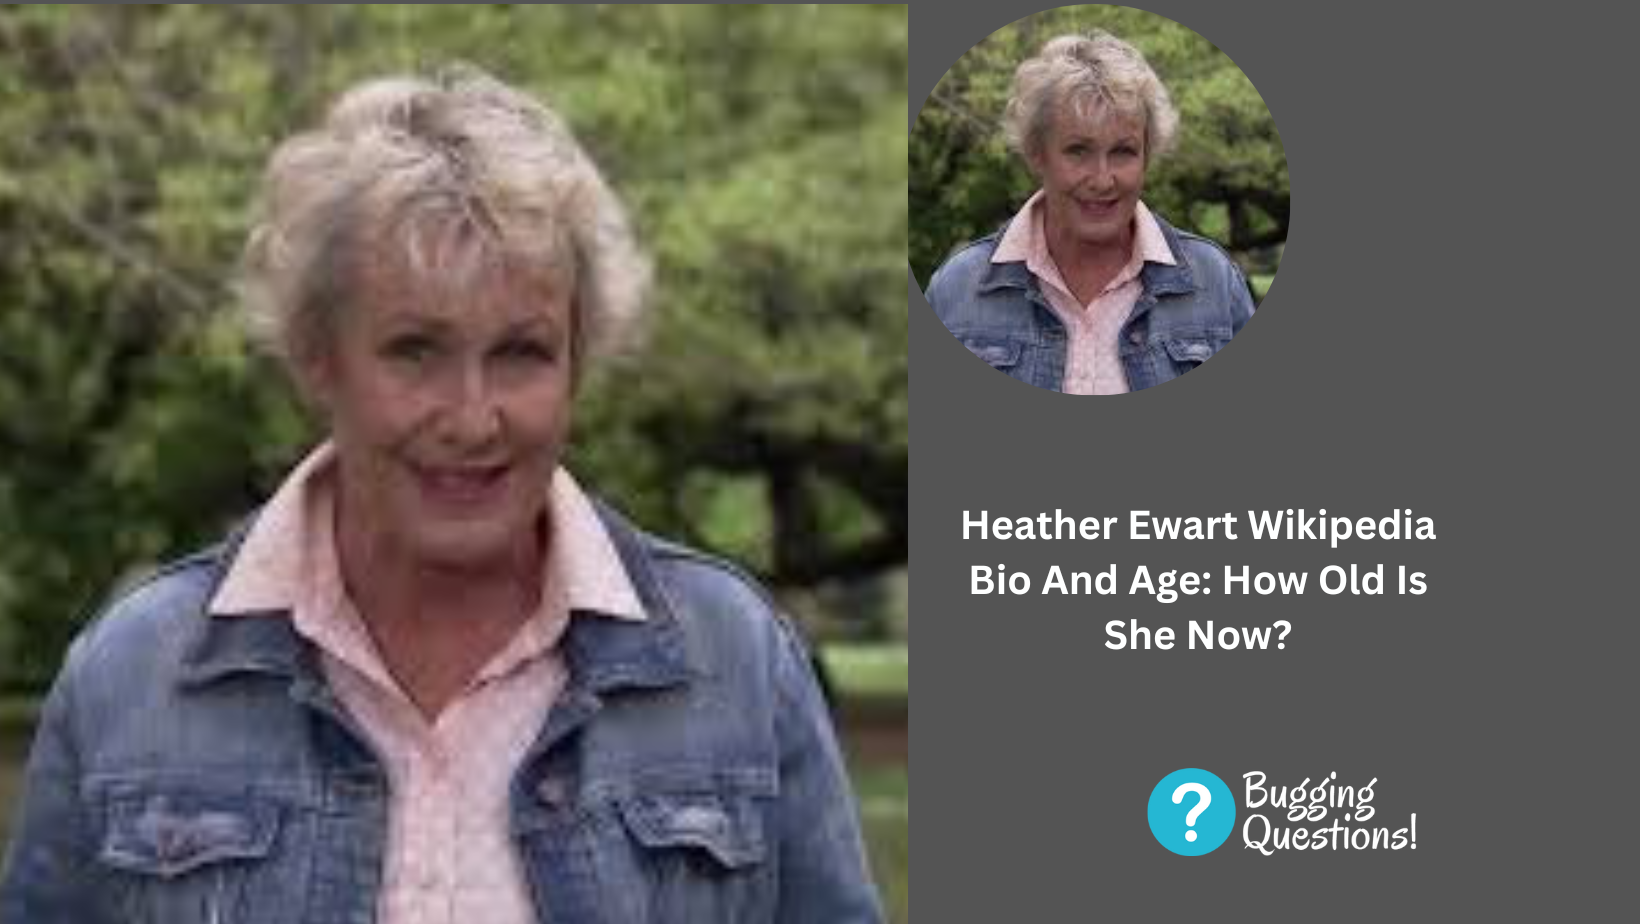 Heather Ewart Wikipedia Bio And Age: How Old Is She Now?